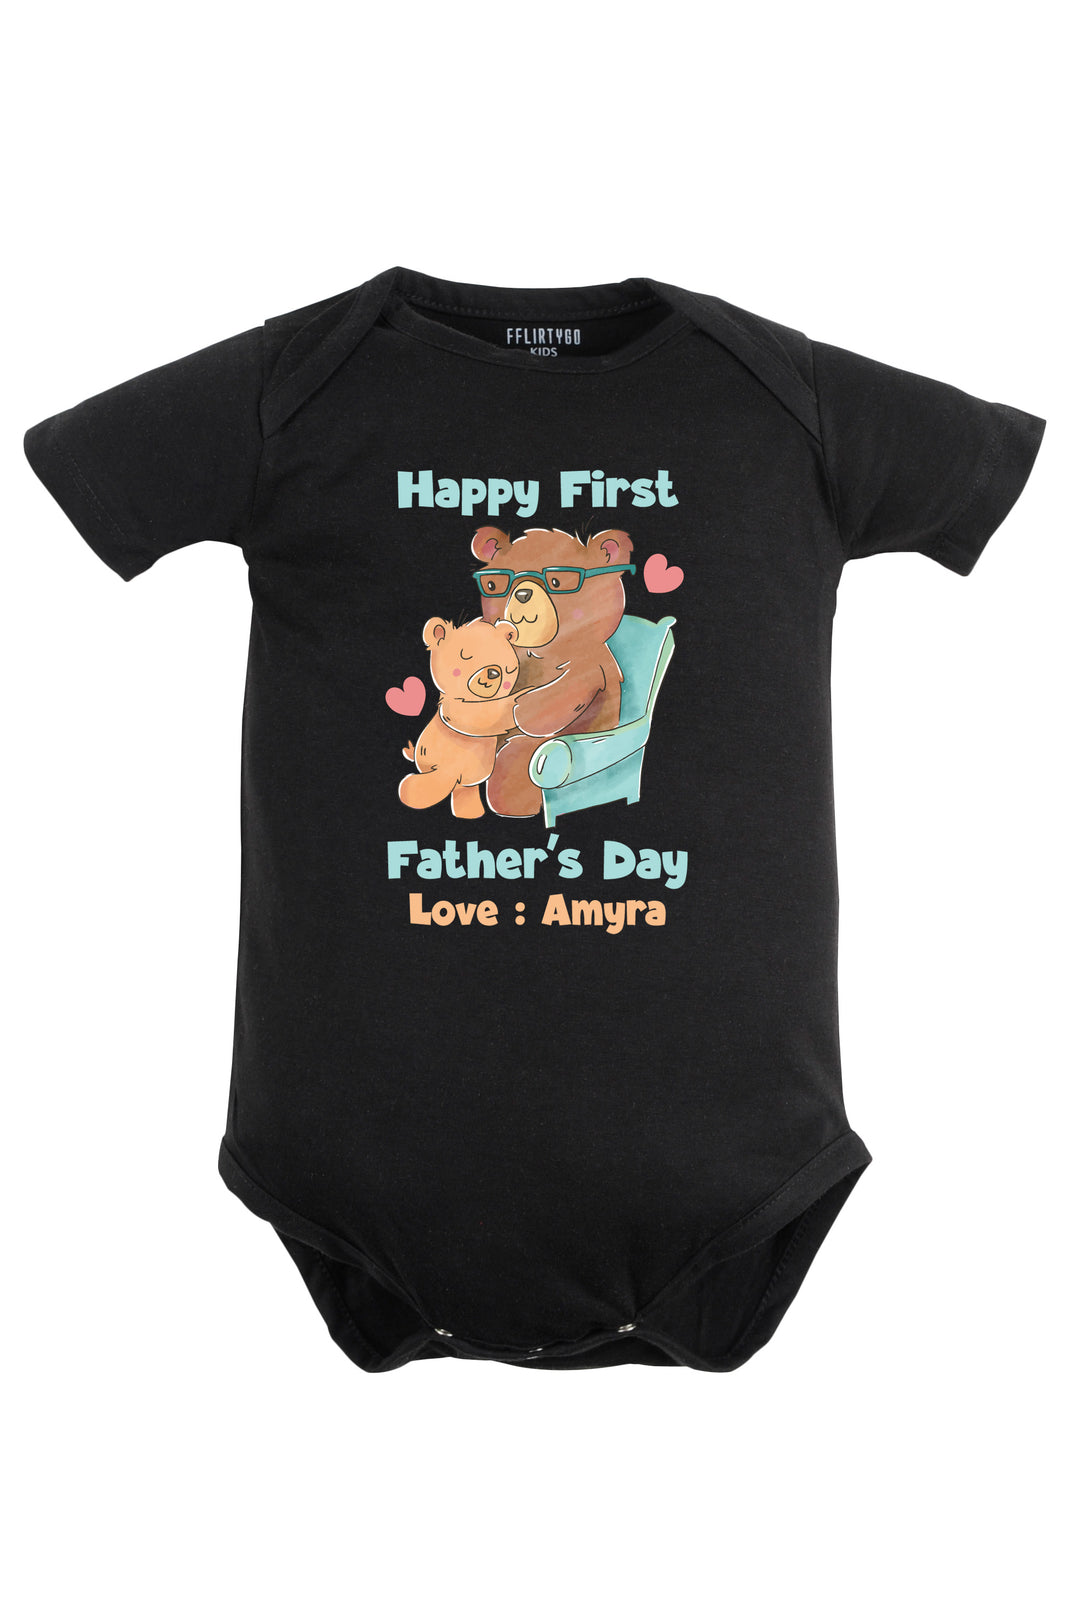 Happy First Father's Day Baby Romper | Onesies w/ Custom Name